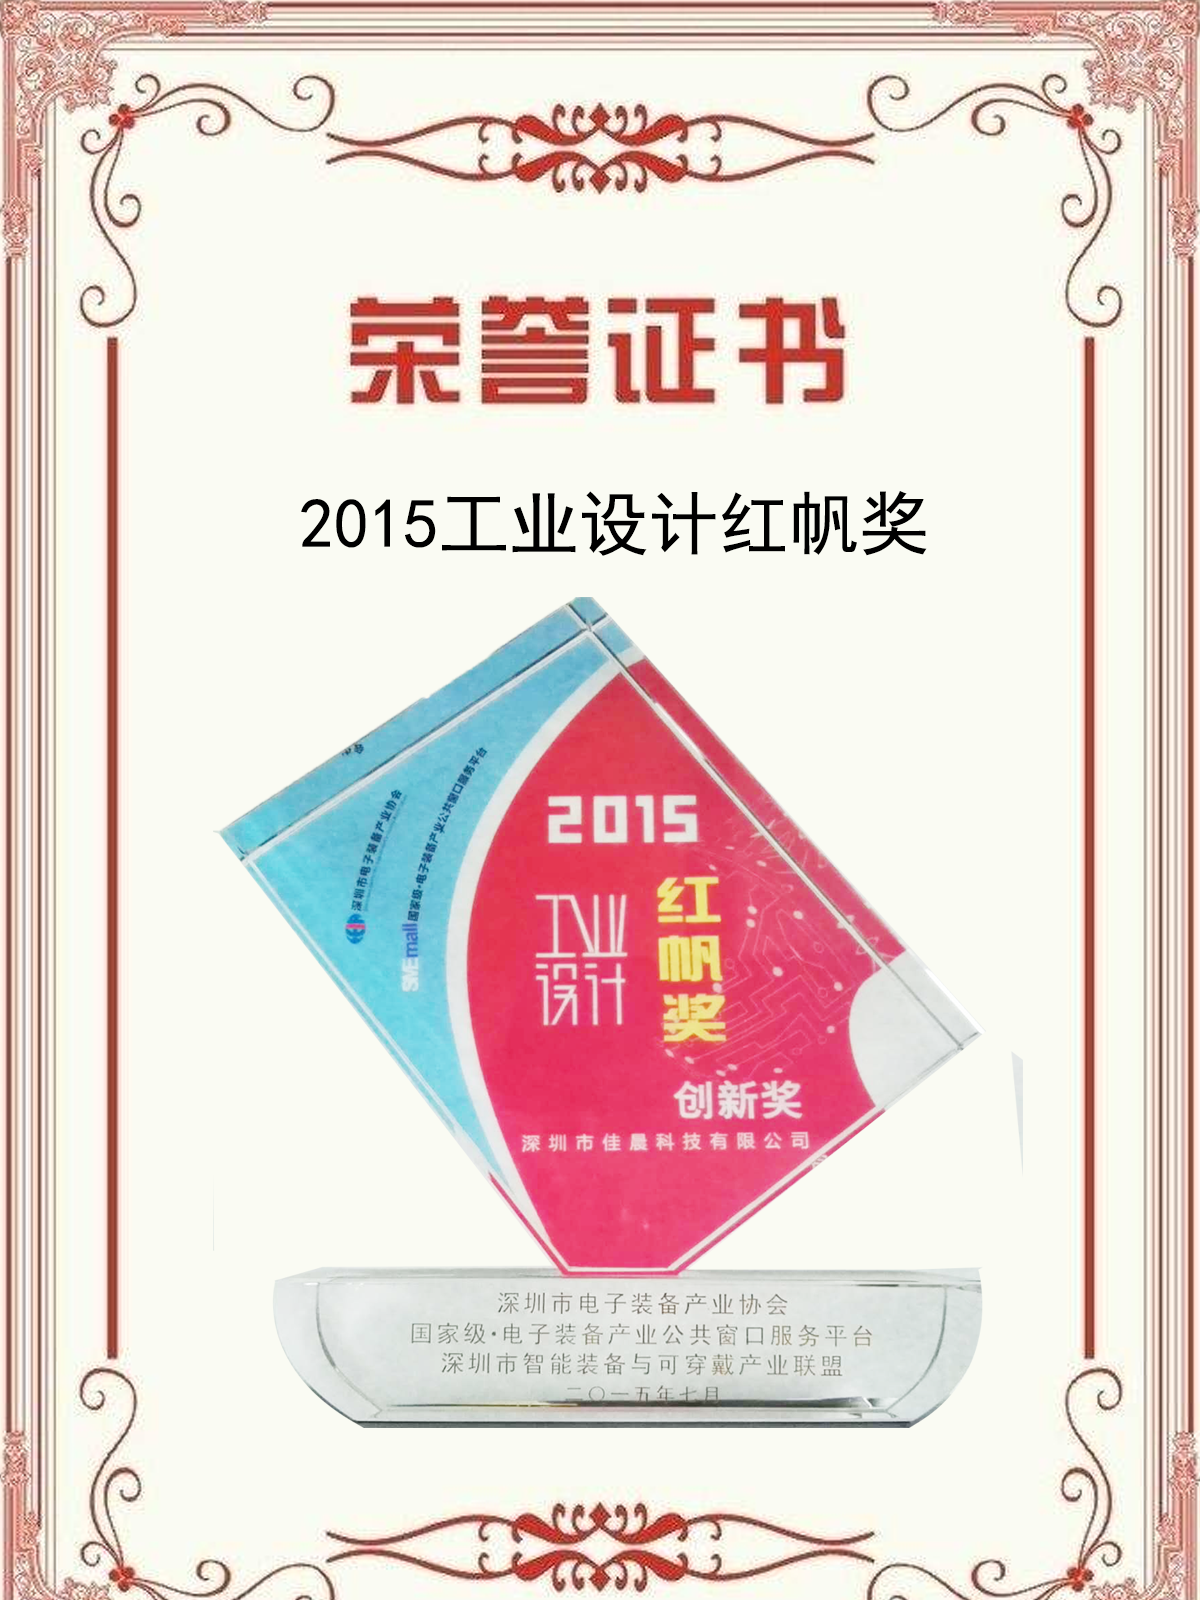 2015 red sail Award for industrial design of shielding box